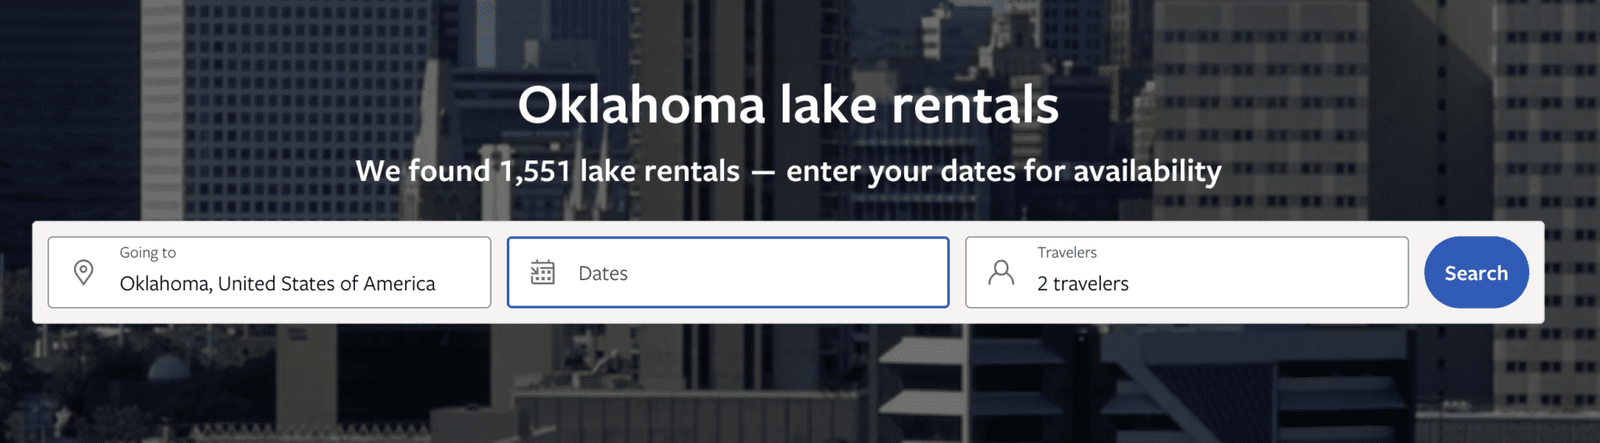 lakes in oklahoma with cabins